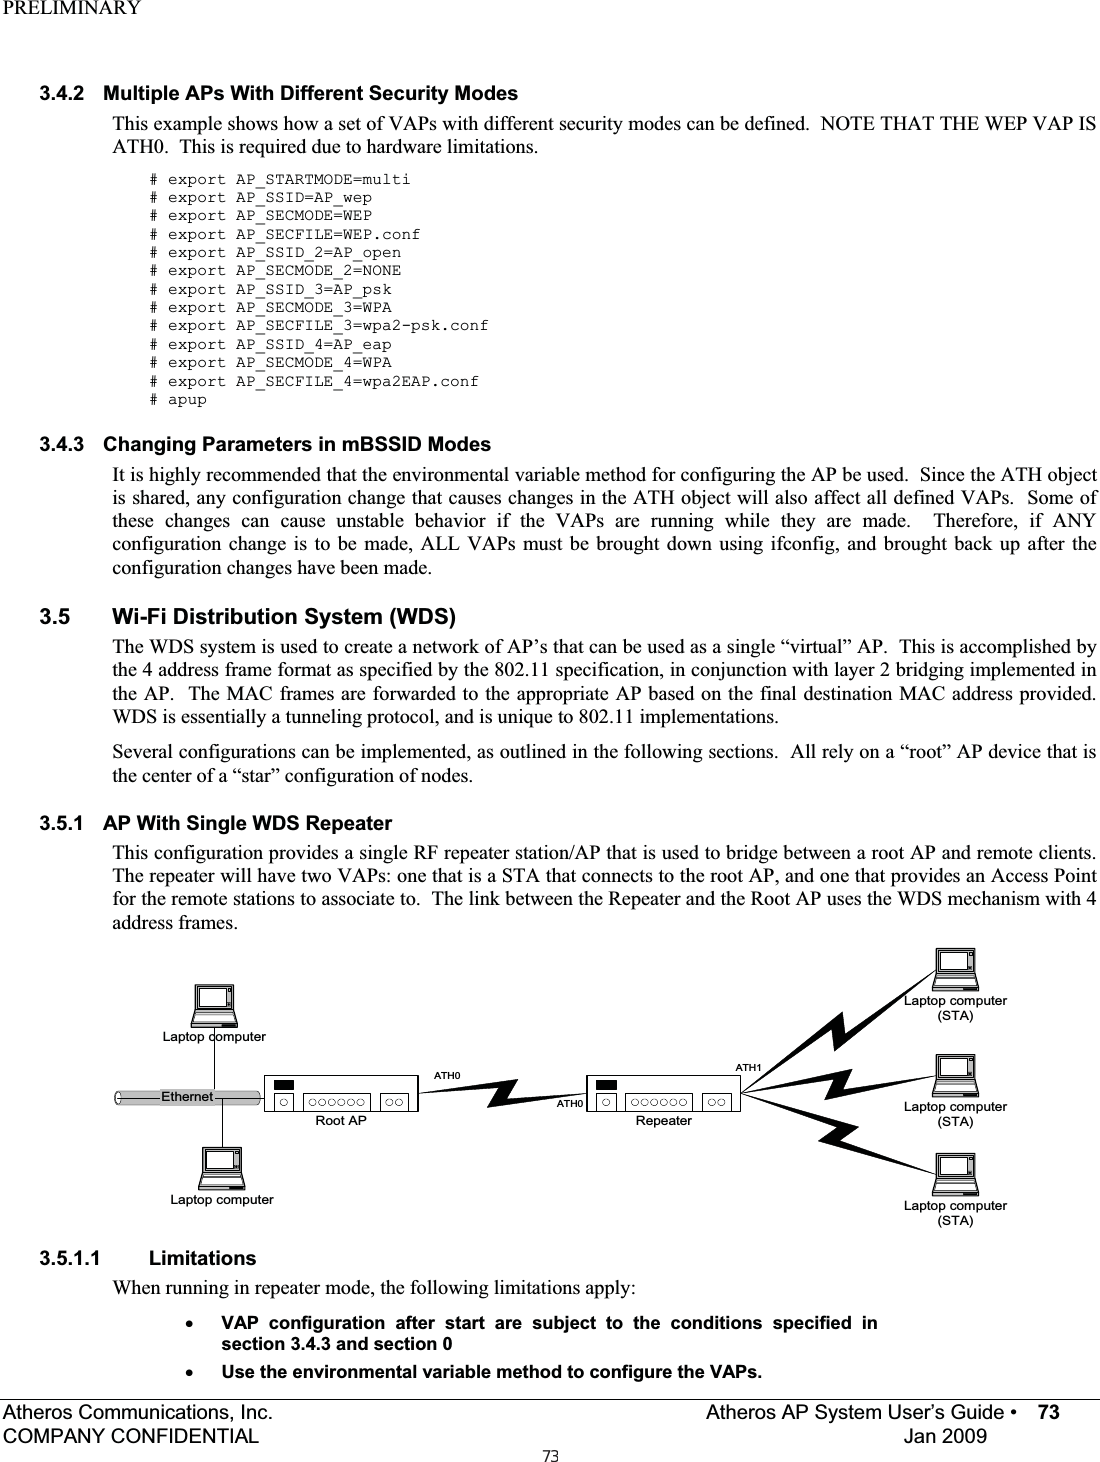 PRELIMINARYAtheros Communications, Inc.     Atheros AP System User’s Guide •  73COMPANY CONFIDENTIAL  Jan 2009 3.4.2  Multiple APs With Different Security Modes This example shows how a set of VAPs with different security modes can be defined.  NOTE THAT THE WEP VAP IS ATH0.  This is required due to hardware limitations. # export AP_STARTMODE=multi # export AP_SSID=AP_wep # export AP_SECMODE=WEP # export AP_SECFILE=WEP.conf # export AP_SSID_2=AP_open # export AP_SECMODE_2=NONE # export AP_SSID_3=AP_psk # export AP_SECMODE_3=WPA # export AP_SECFILE_3=wpa2-psk.conf # export AP_SSID_4=AP_eap # export AP_SECMODE_4=WPA # export AP_SECFILE_4=wpa2EAP.conf # apup 3.4.3  Changing Parameters in mBSSID Modes It is highly recommended that the environmental variable method for configuring the AP be used.  Since the ATH object is shared, any configuration change that causes changes in the ATH object will also affect all defined VAPs.  Some of these changes can cause unstable behavior if the VAPs are running while they are made.  Therefore, if ANY configuration change is to be made, ALL VAPs must be brought down using ifconfig, and brought back up after the configuration changes have been made. 3.5  Wi-Fi Distribution System (WDS) The WDS system is used to create a network of AP’s that can be used as a single “virtual” AP.  This is accomplished by the 4 address frame format as specified by the 802.11 specification, in conjunction with layer 2 bridging implemented in the AP.  The MAC frames are forwarded to the appropriate AP based on the final destination MAC address provided.  WDS is essentially a tunneling protocol, and is unique to 802.11 implementations. Several configurations can be implemented, as outlined in the following sections.  All rely on a “root” AP device that is the center of a “star” configuration of nodes. 3.5.1  AP With Single WDS Repeater This configuration provides a single RF repeater station/AP that is used to bridge between a root AP and remote clients.  The repeater will have two VAPs: one that is a STA that connects to the root AP, and one that provides an Access Point for the remote stations to associate to.  The link between the Repeater and the Root AP uses the WDS mechanism with 4 address frames. EthernetLaptop computer(STA)Root APLaptop computerLaptop computer(STA)Laptop computer(STA)Laptop computerRepeaterATH0ATH1ATH03.5.1.1 Limitations When running in repeater mode, the following limitations apply: xVAP configuration after start are subject to the conditions specified in section 3.4.3 and section 0 xUse the environmental variable method to configure the VAPs. 73